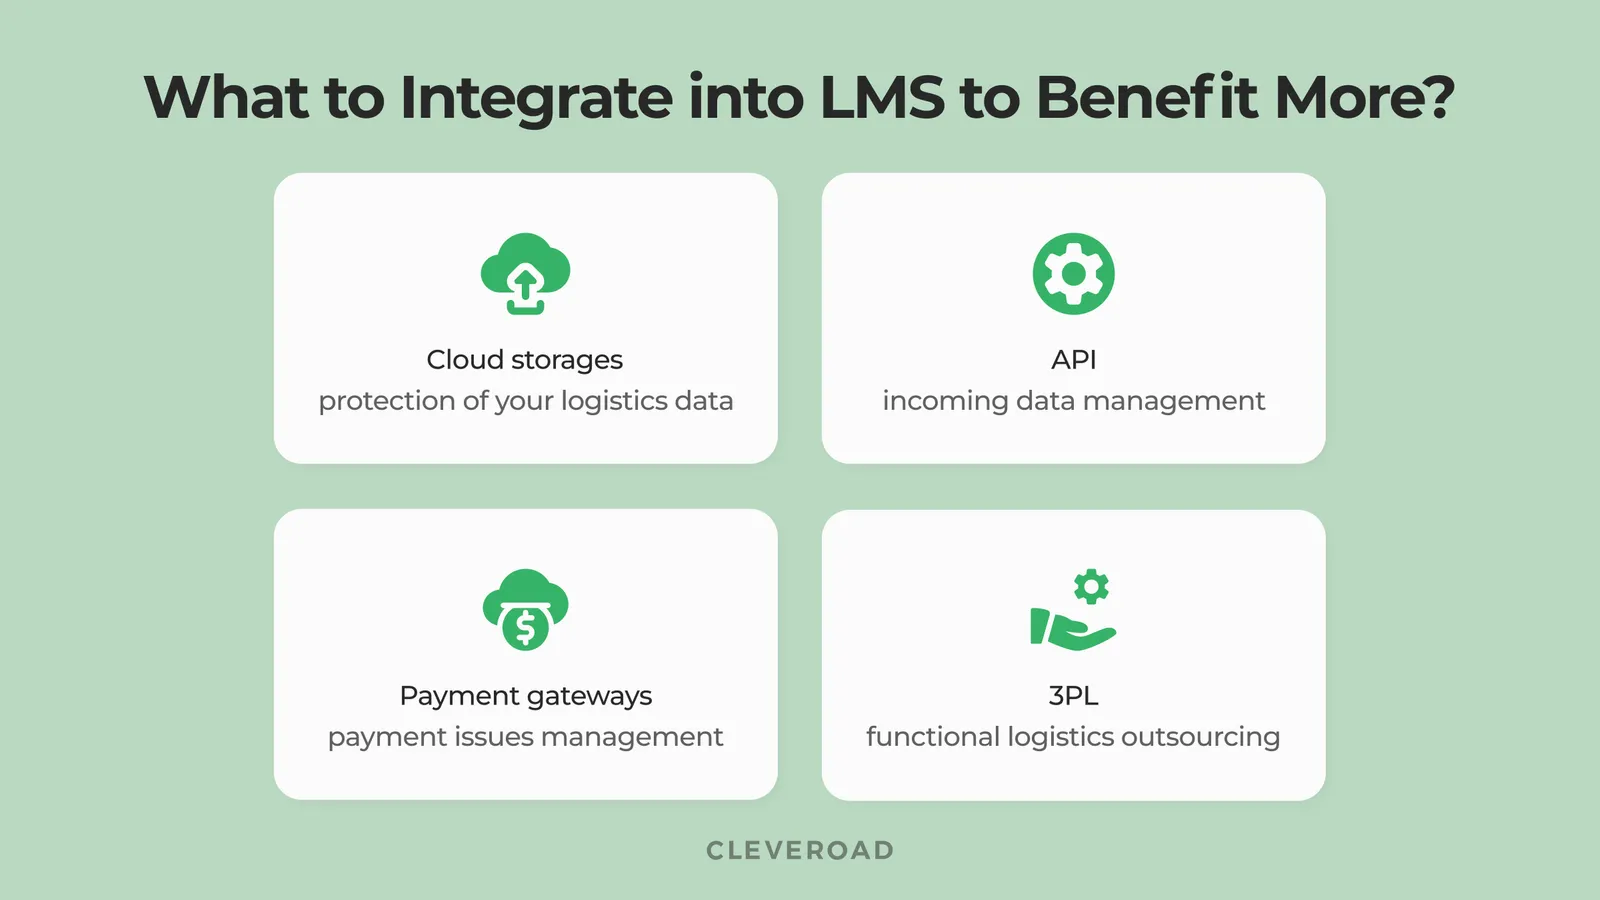 What to integrate into LMS for obtaining one of the best logistics softwares?